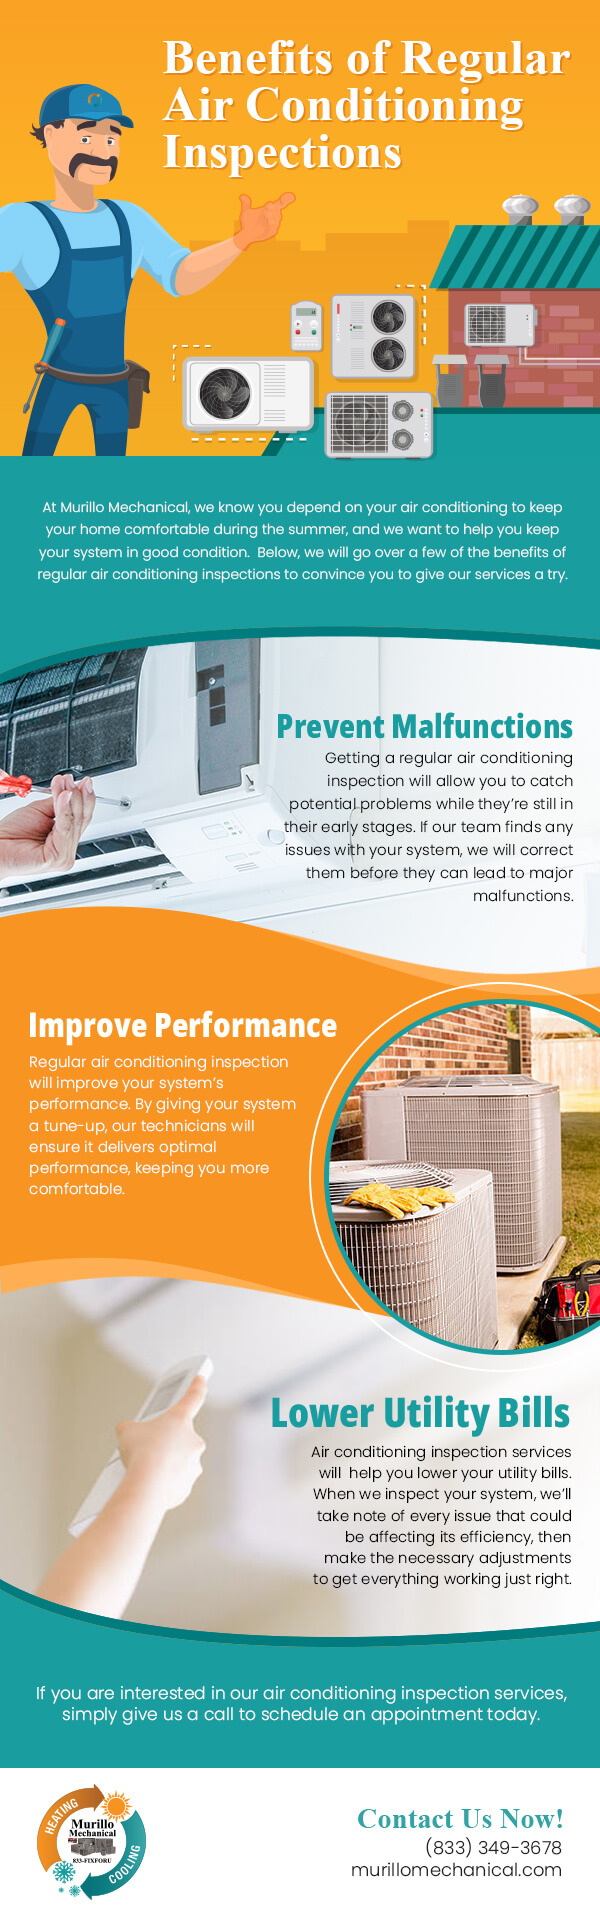 Benefits of Regular Air Conditioning Inspections [infographic]